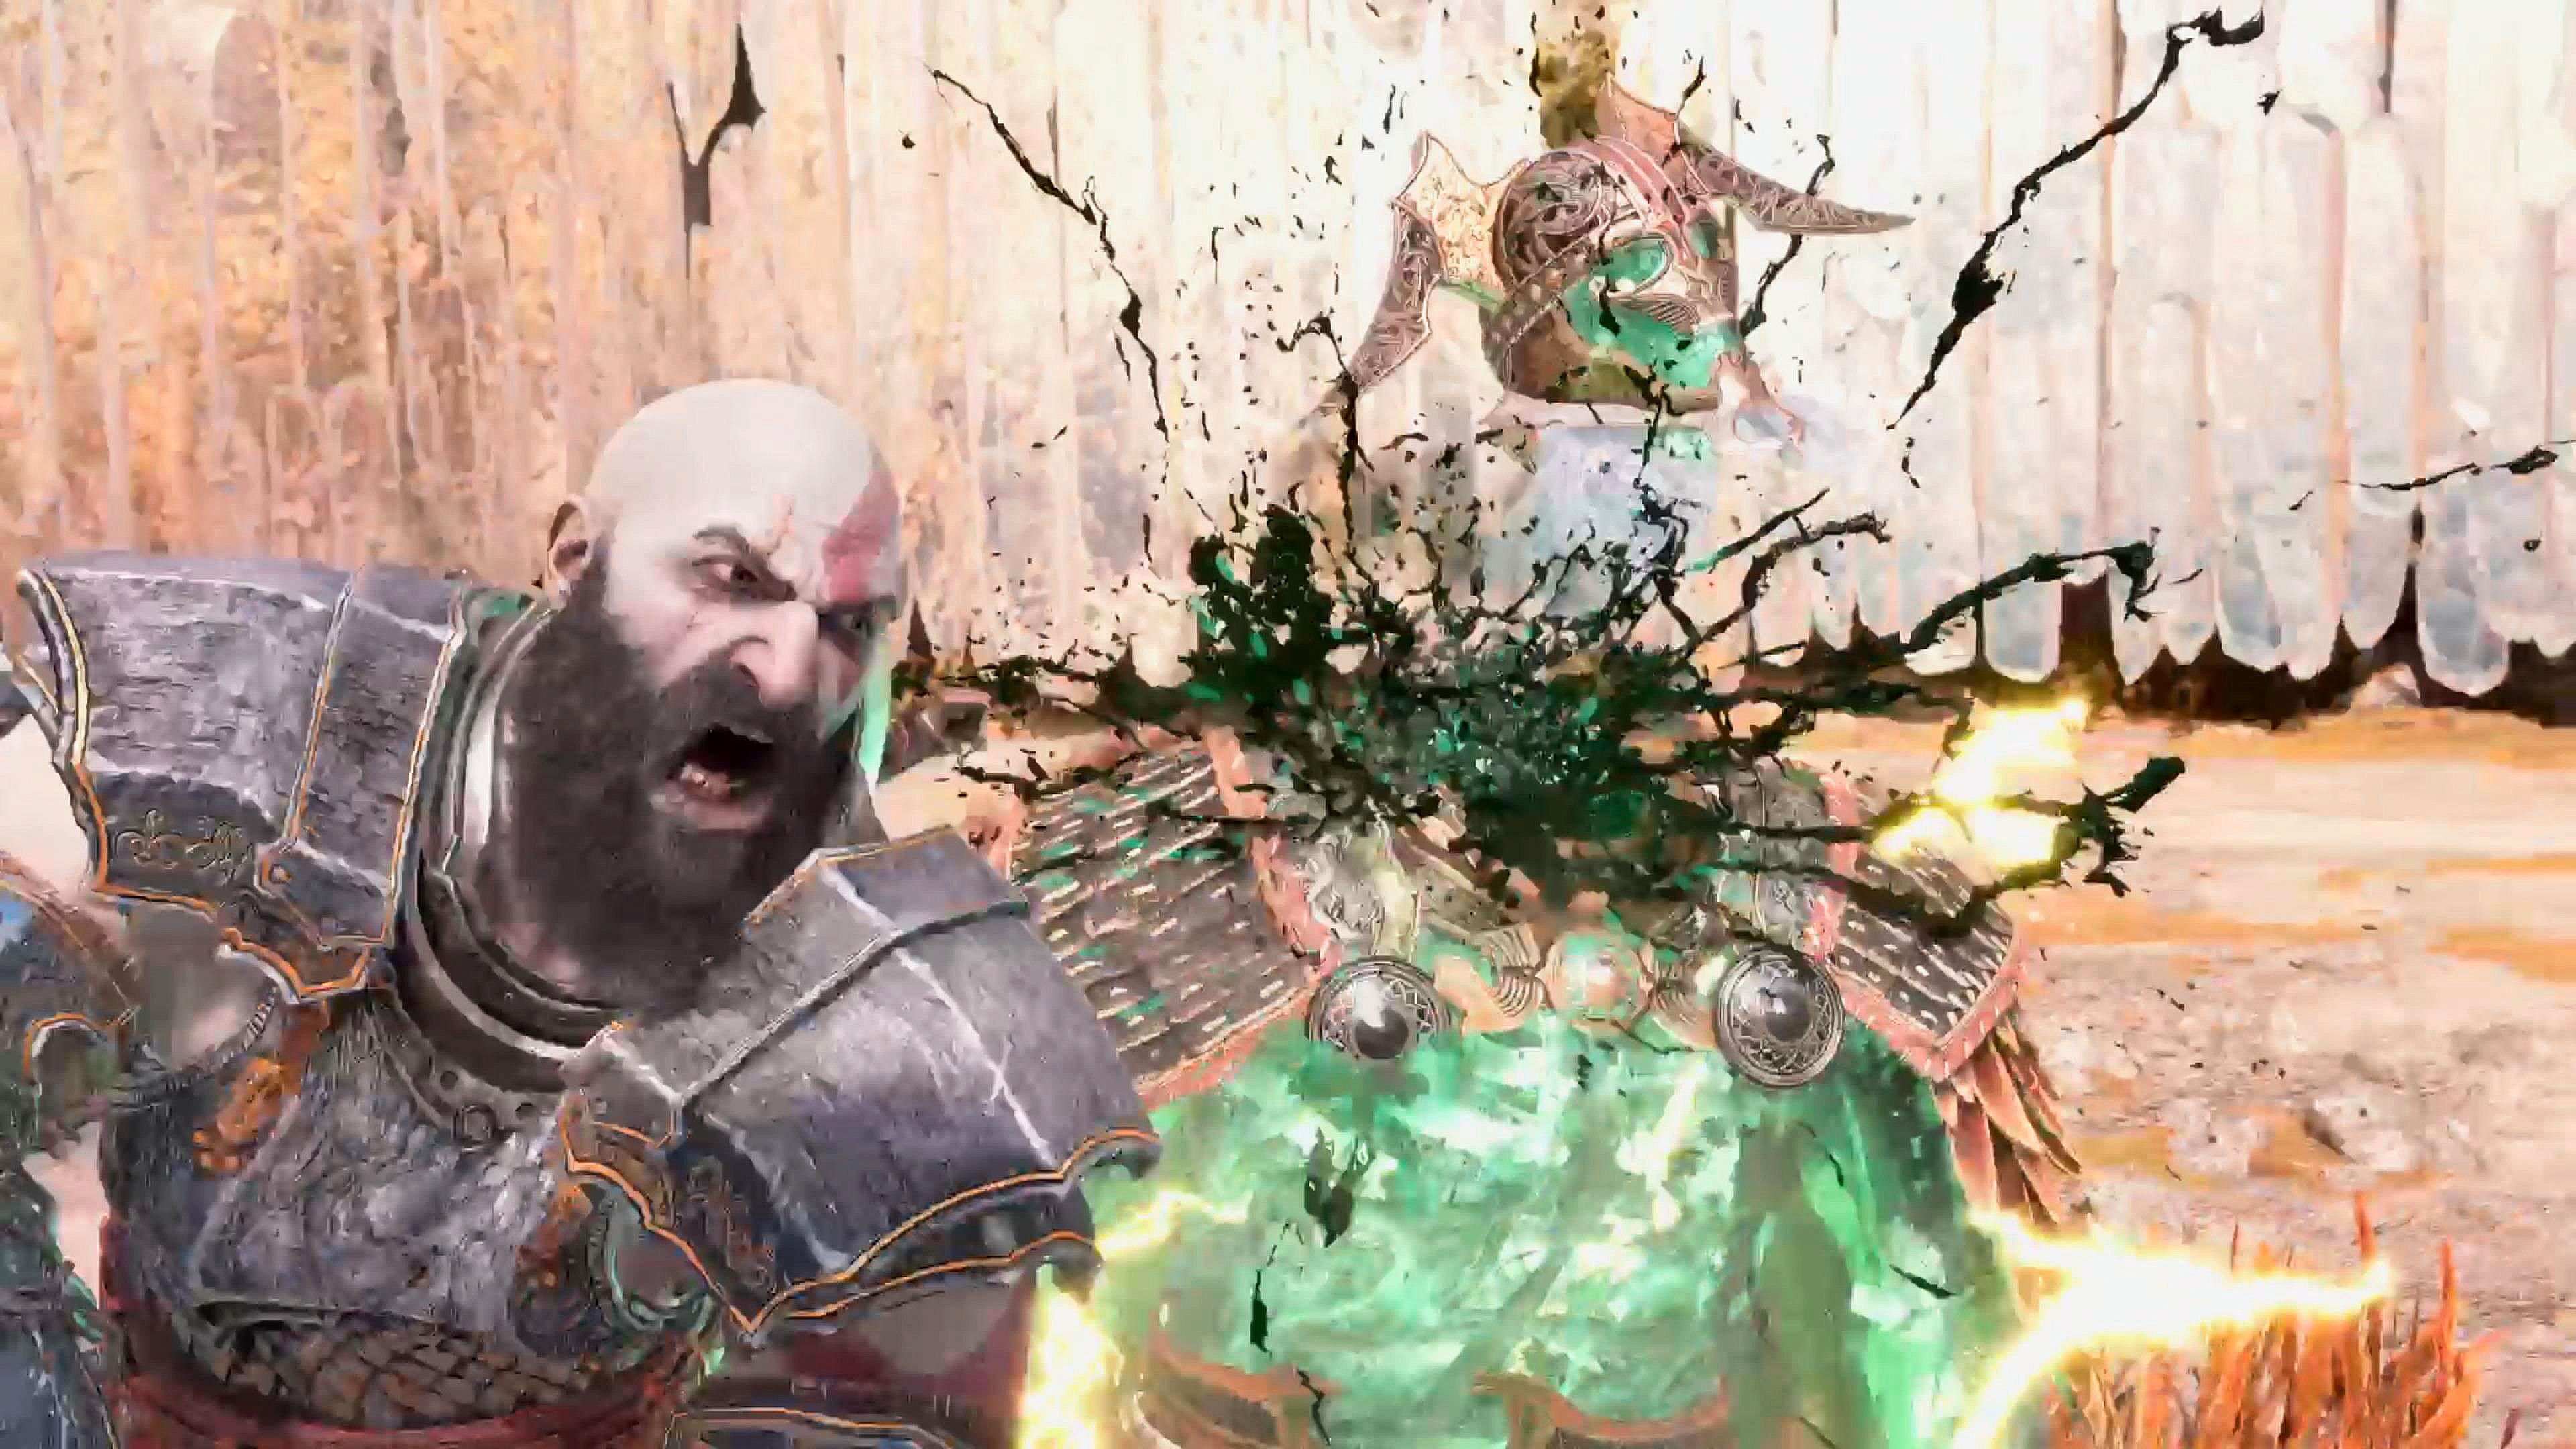 When Beigadr’s health is depleted, finish him off the only way Kratos knows how.